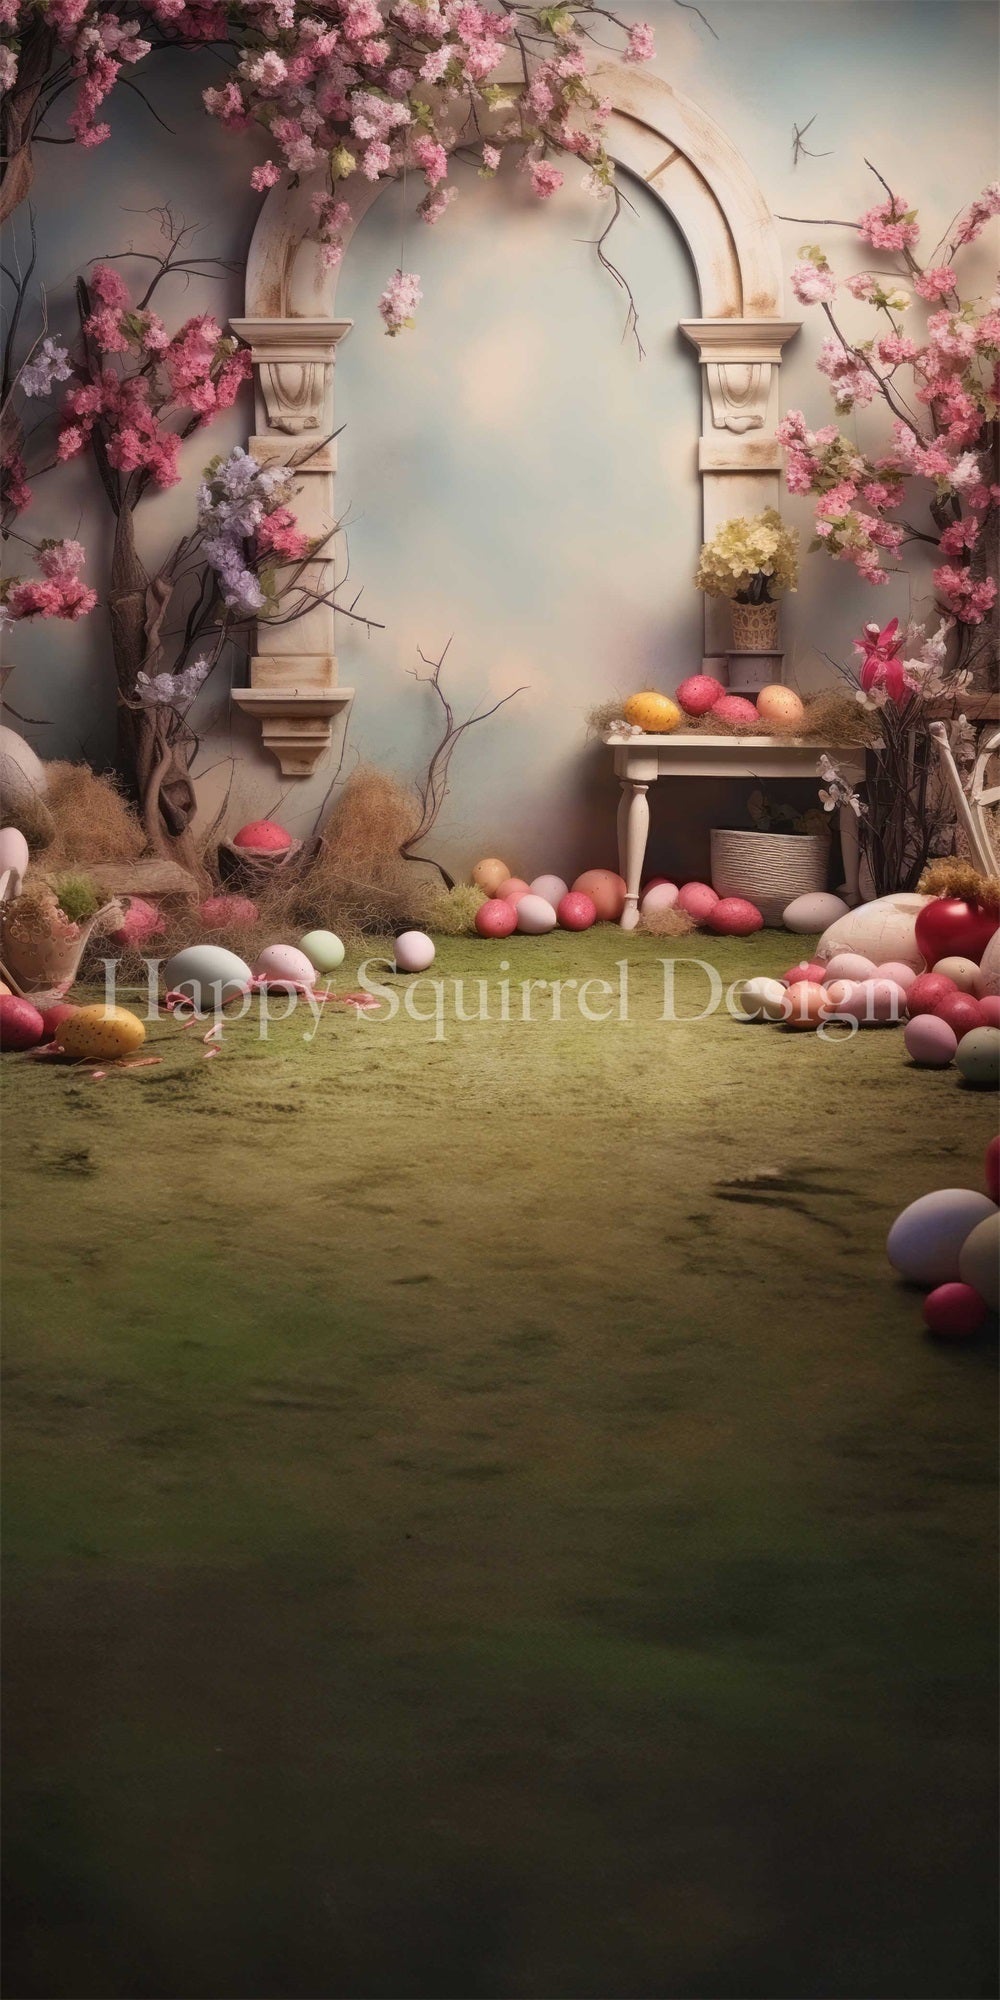 Kate Sweep Spring Easter Eggs Indoor Colorful Flower Vintage Light Blue Arched Wall Backdrop Designed by Happy Squirrel Design